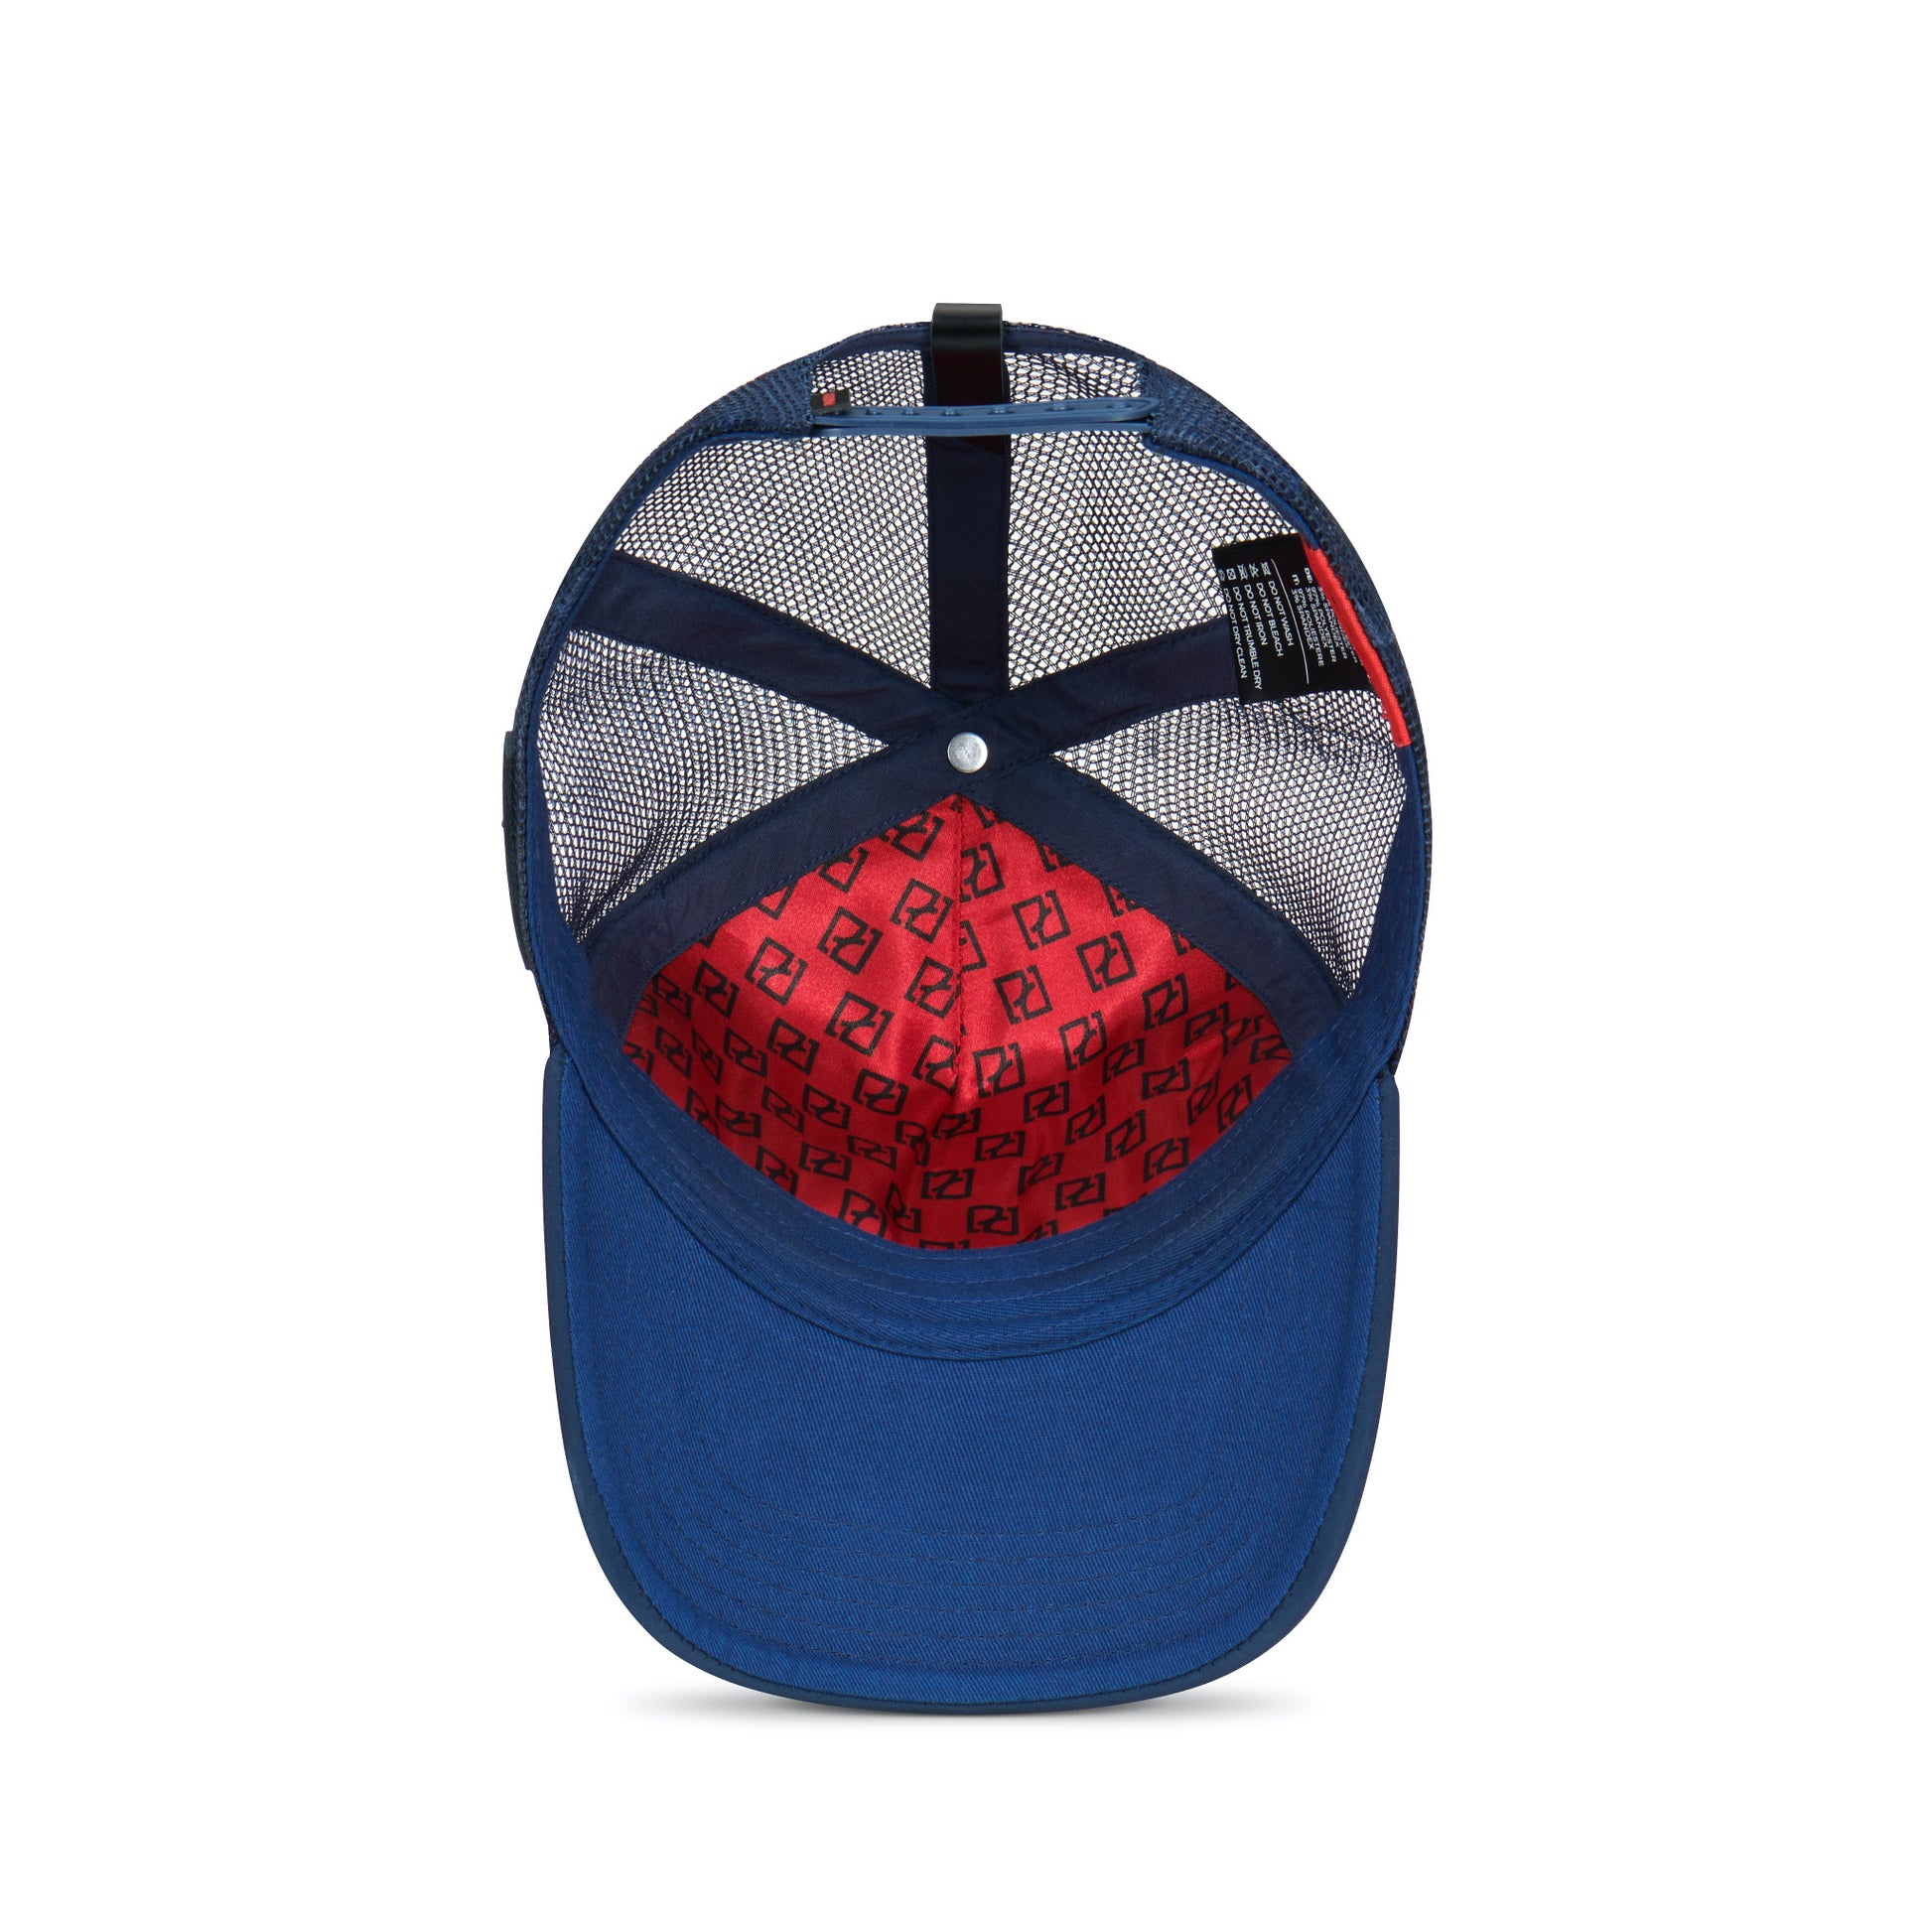 Partch Trucker hat Navy Blue with Art front Panel patch removable | Men’s and Women’s Collection